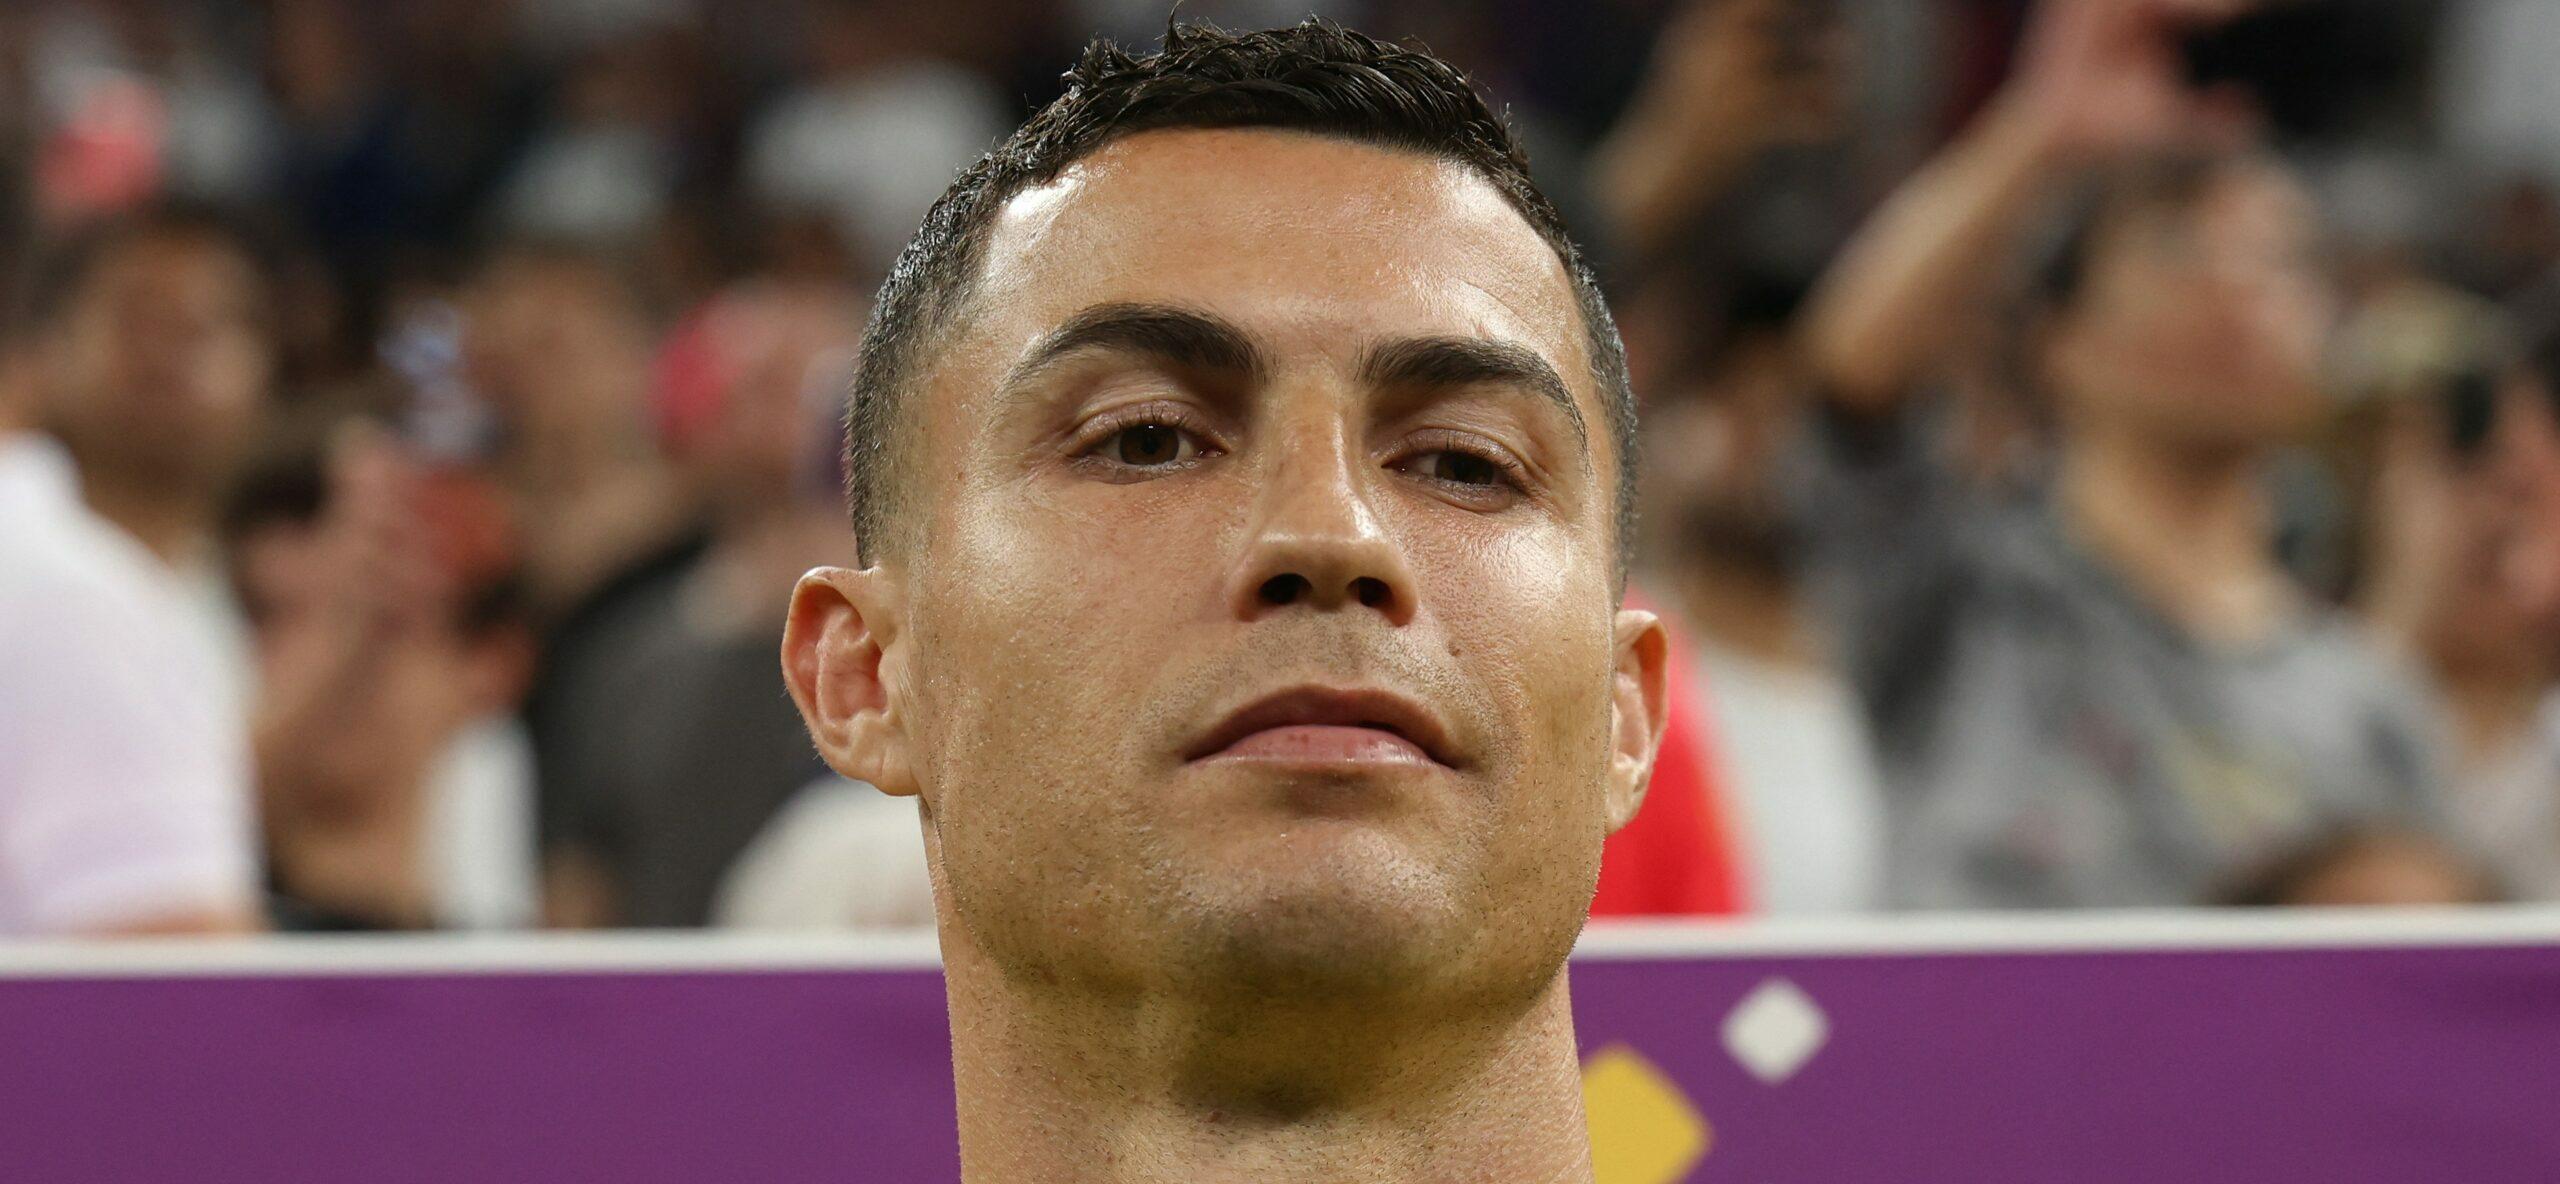 Cristiano Ronaldo’s Partner SLAMS Team Portugal For Benching Him At World Cup!